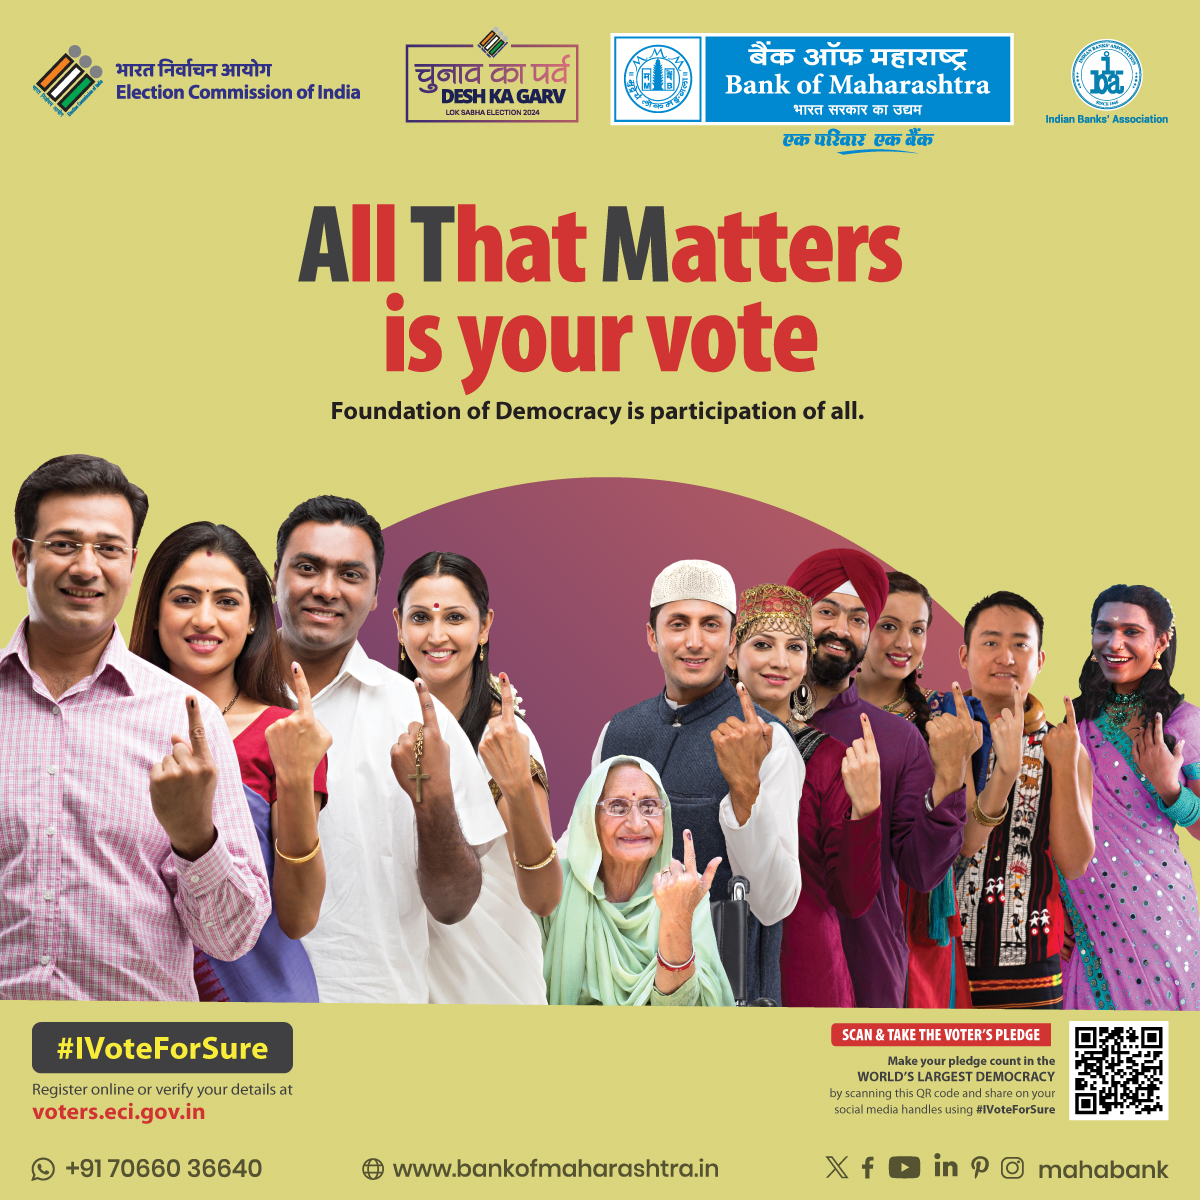 Every vote matters. Step up, participate, and make your vote count.
@ecisveep
@DFS_India 
#BankofMaharashtra #Mahabank #EveryVoteCounts #SmartVoter #IVoteForSure